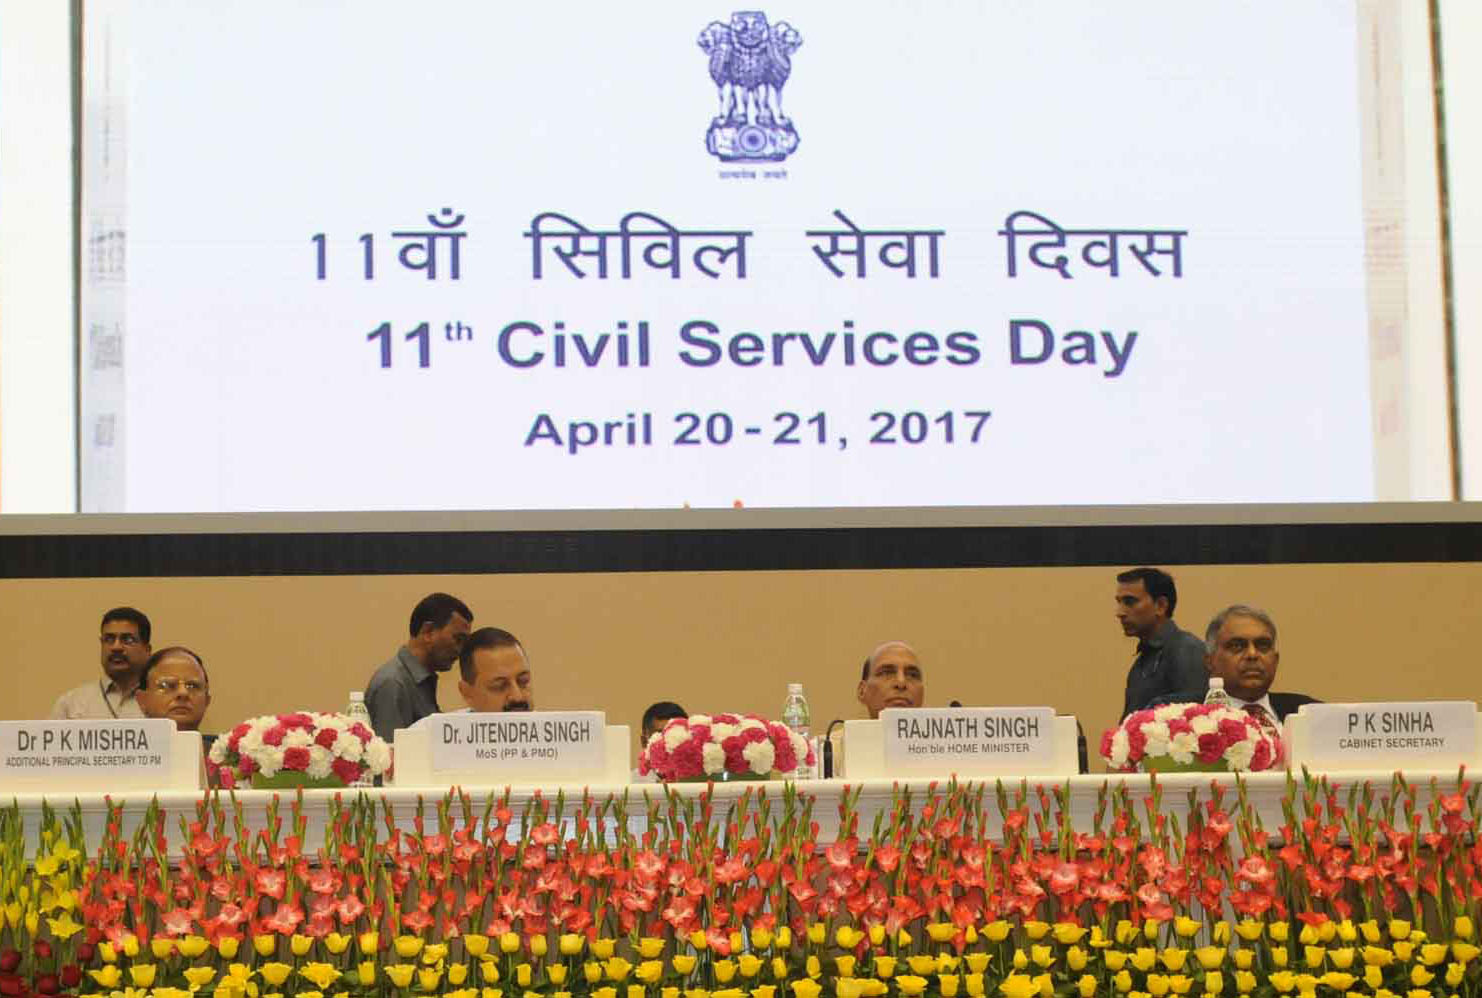 The Union Home Minister, Shri Rajnath Singh at the inauguration of the 11th Civil Services Day 2017 function, in New Delhi on April 20, 2017. 	The Minister of State for Development of North Eastern Region (I/C), Prime Ministers Office, Personnel, Public Grievances & Pensions, Atomic Energy and Space, Dr. Jitendra Singh, the Cabinet Secretary, Shri P.K. Sinha, the Additional Principal Secretary to the Prime Minister, Dr. P.K. Mishra and other dignitaries are also seen.